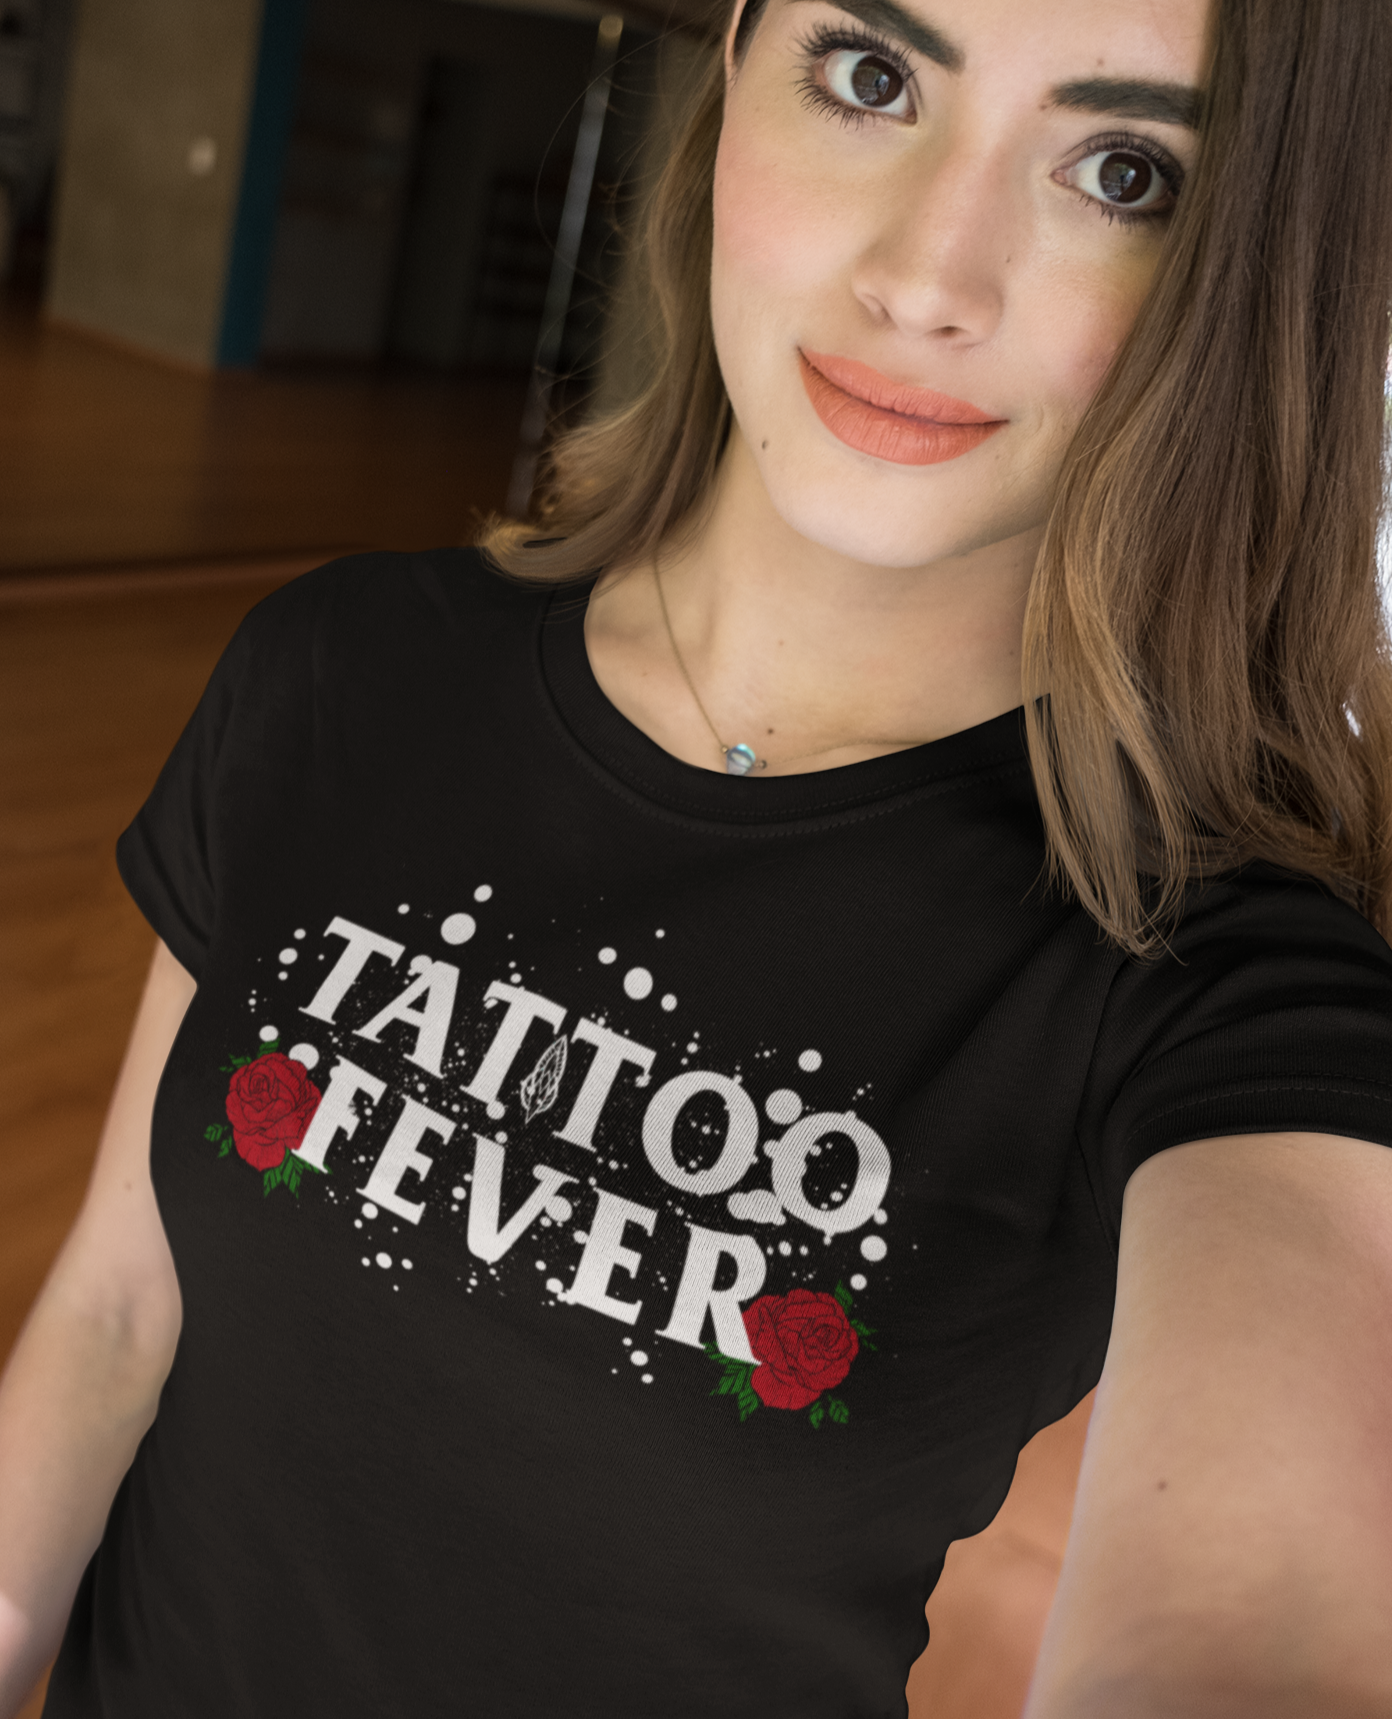 Black shirt with roses saying tattoo fever - HighCiti